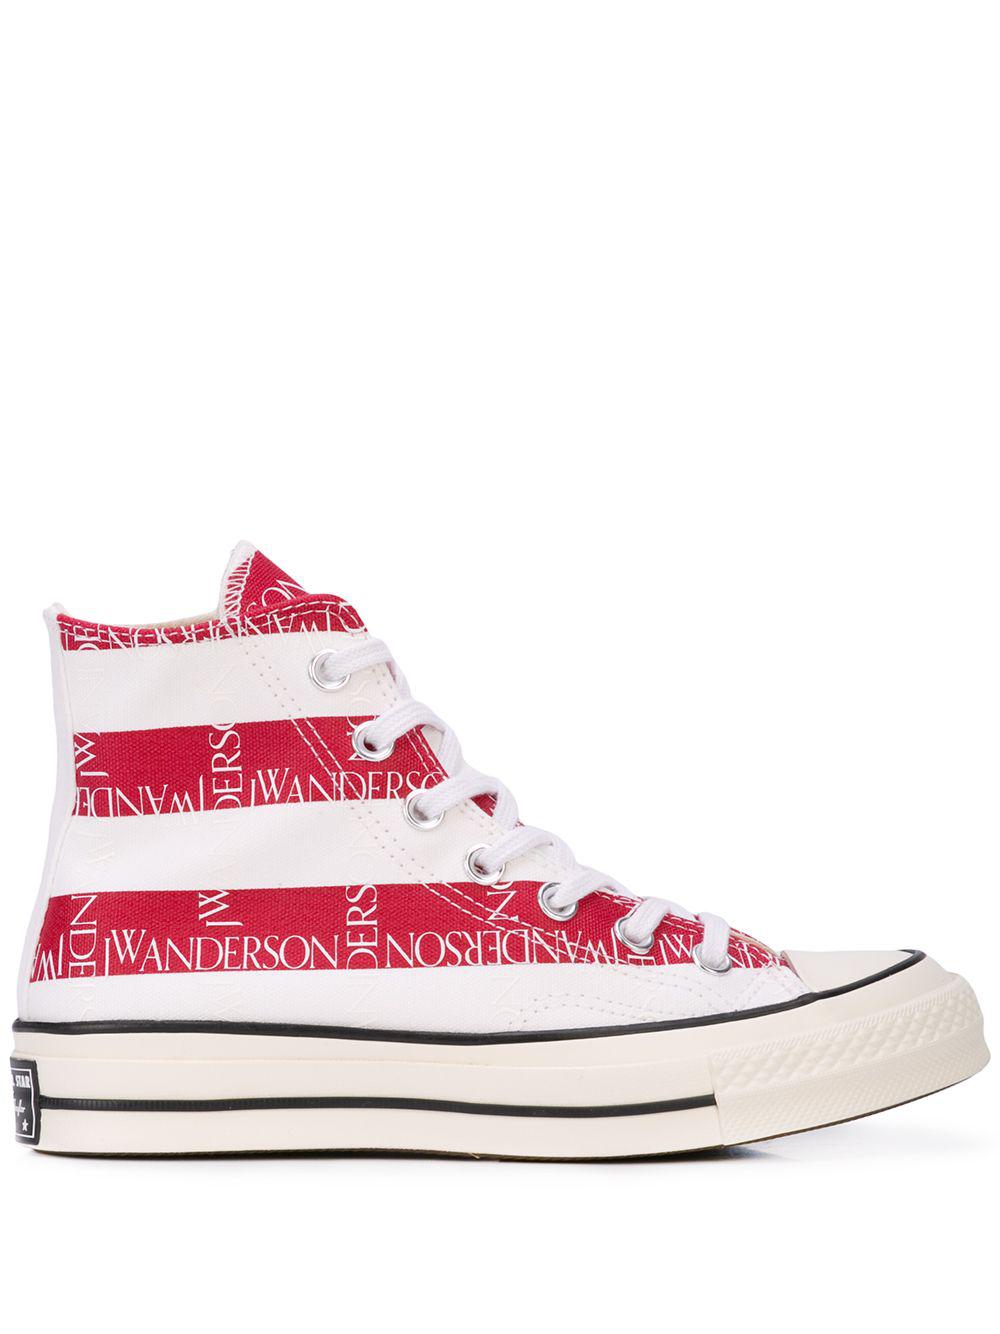 x Converse Chuck Taylor sneakers by CONVERSE X JW ANDERSON